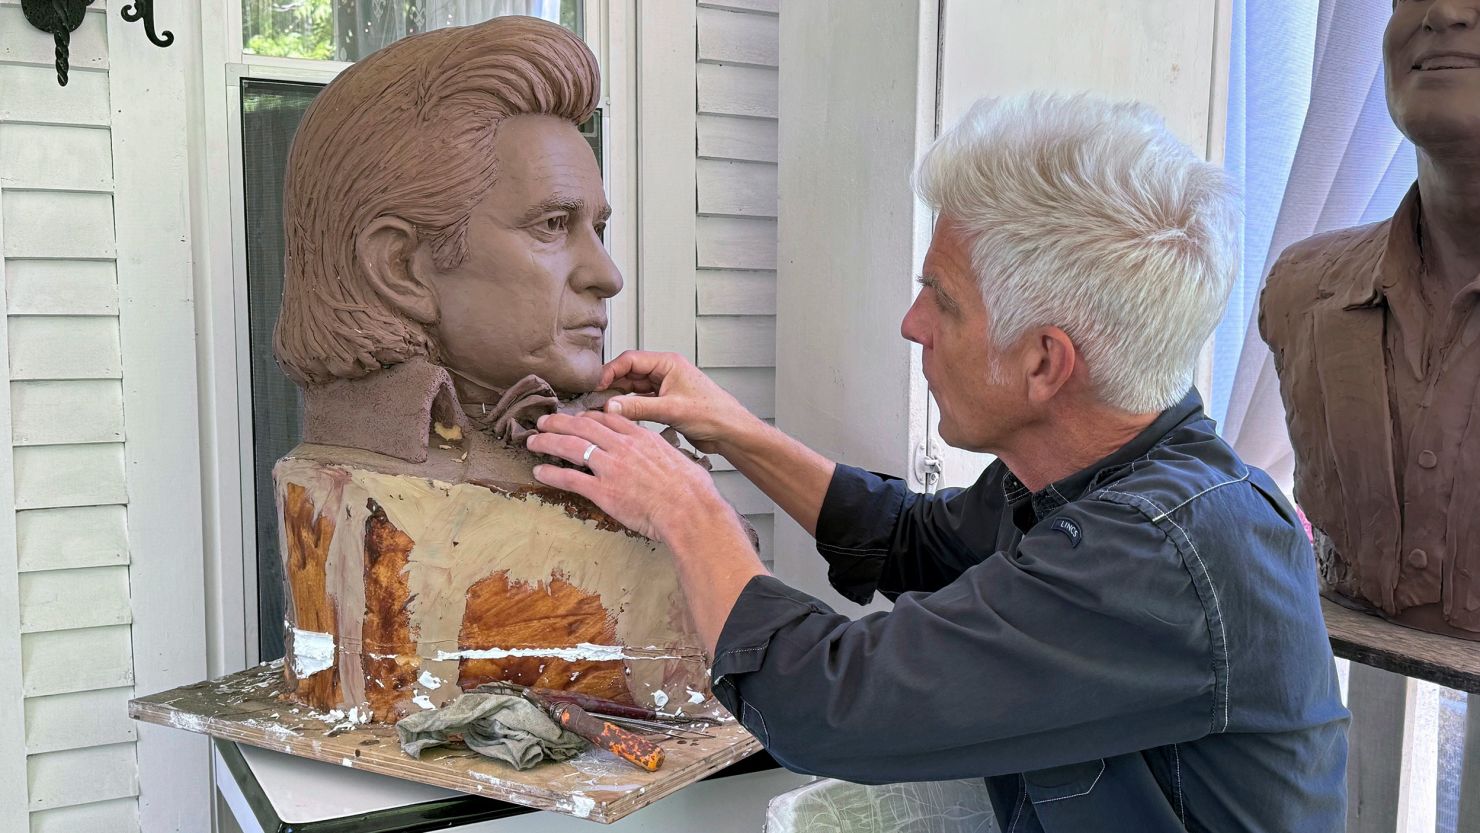 Artist Kevin Kresse works on a clay bust of Johnny Cash in Little Rock, Arkansas. Kresse's full sculpture of Cash will be unveiled at the US Capitol as part of the Natural Statuary Hall collection.